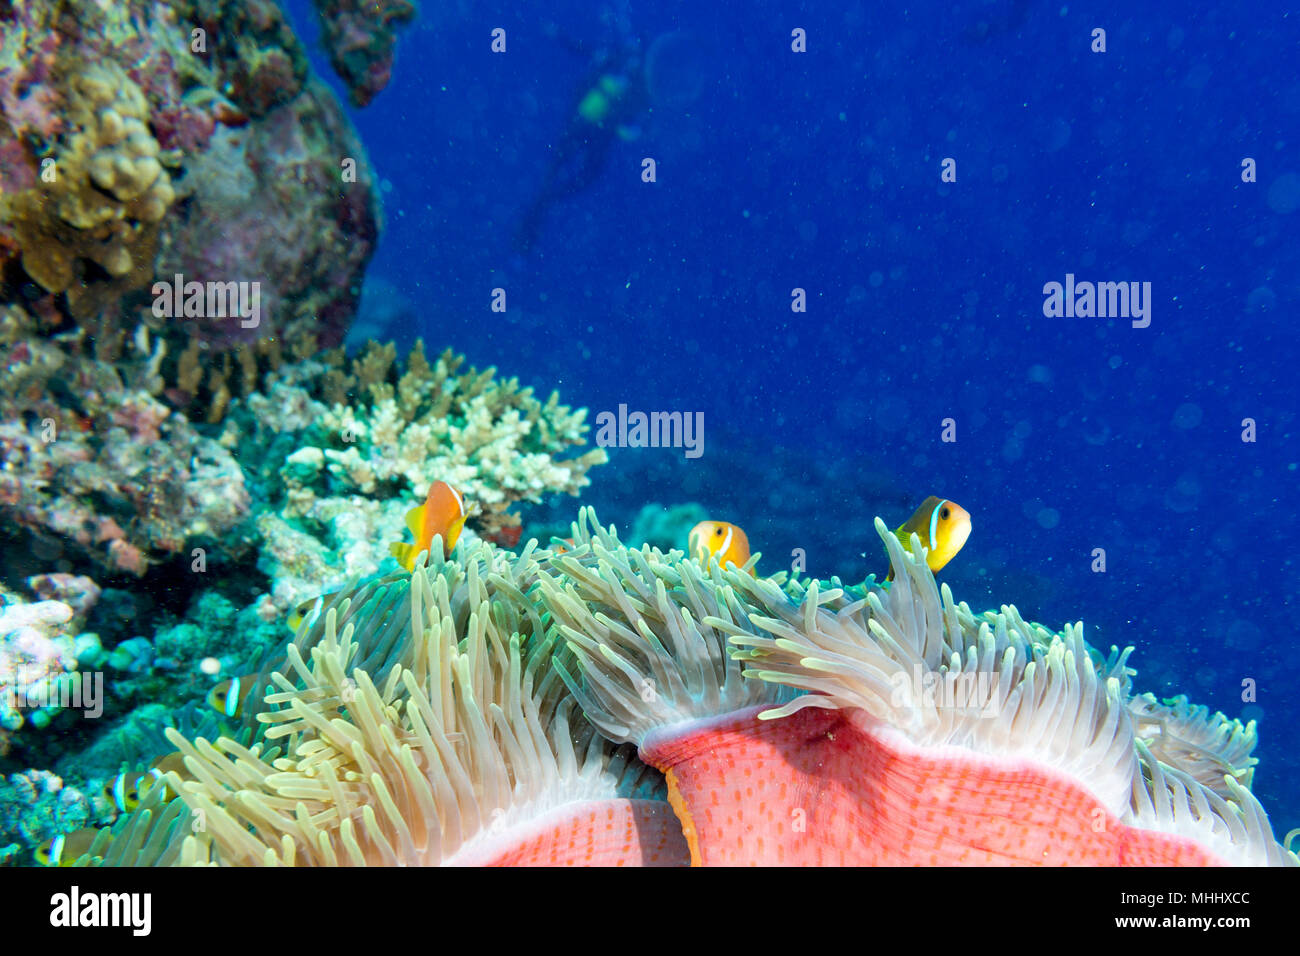 Clown fish family inside red anemone Stock Photo